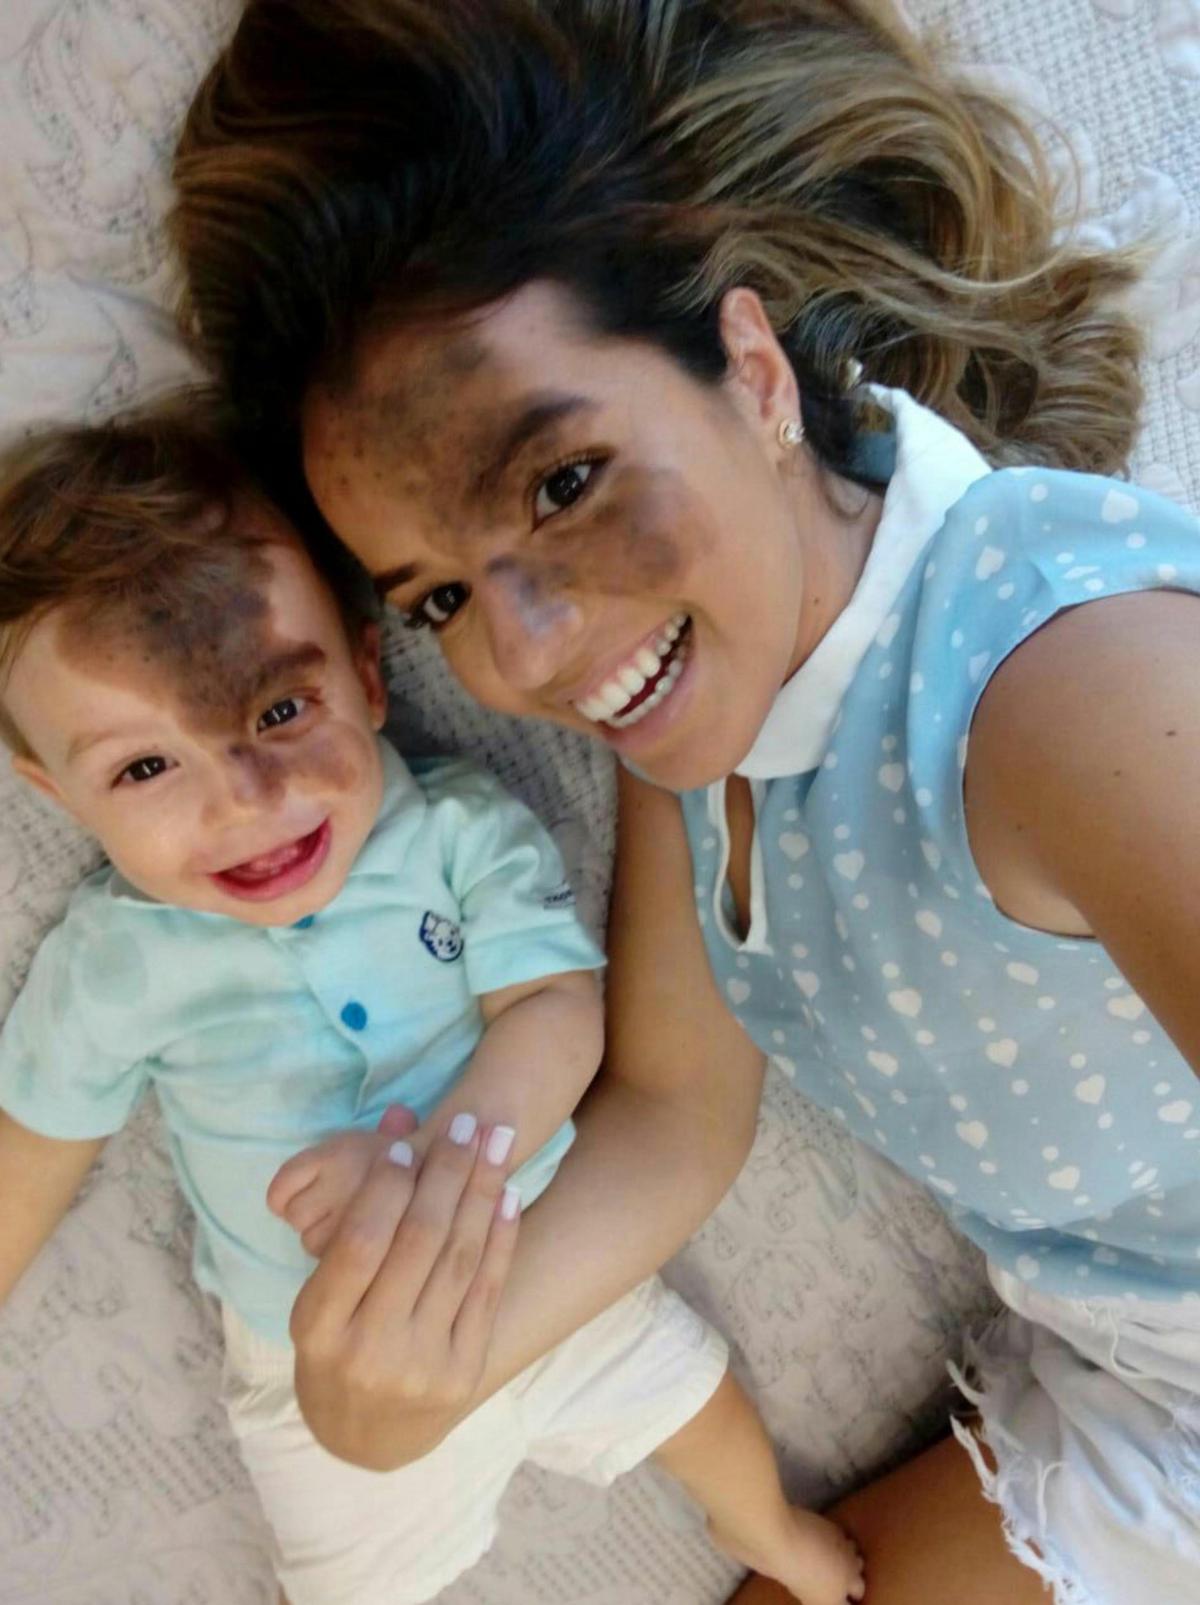 Carolina Giraldelli after she had her son Enzo's unique birthmark painted on her own face. (Caters News)